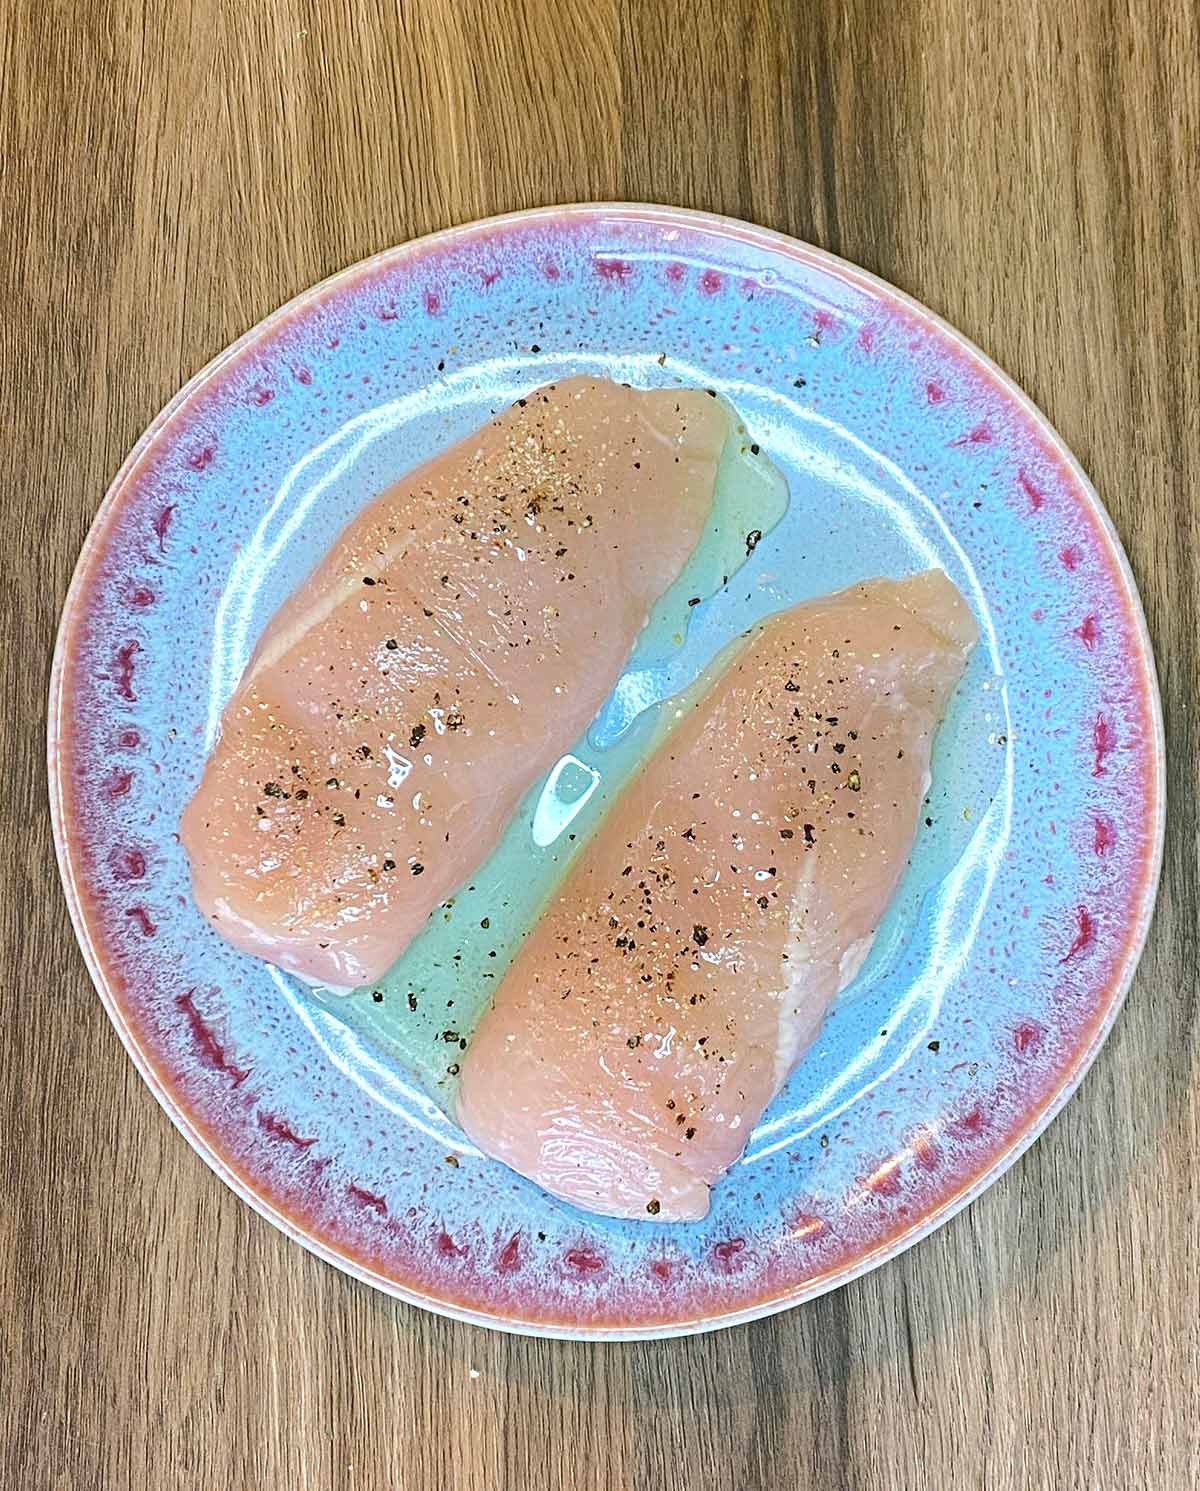 Two raw chicken breasts coated in oil and seasoning.